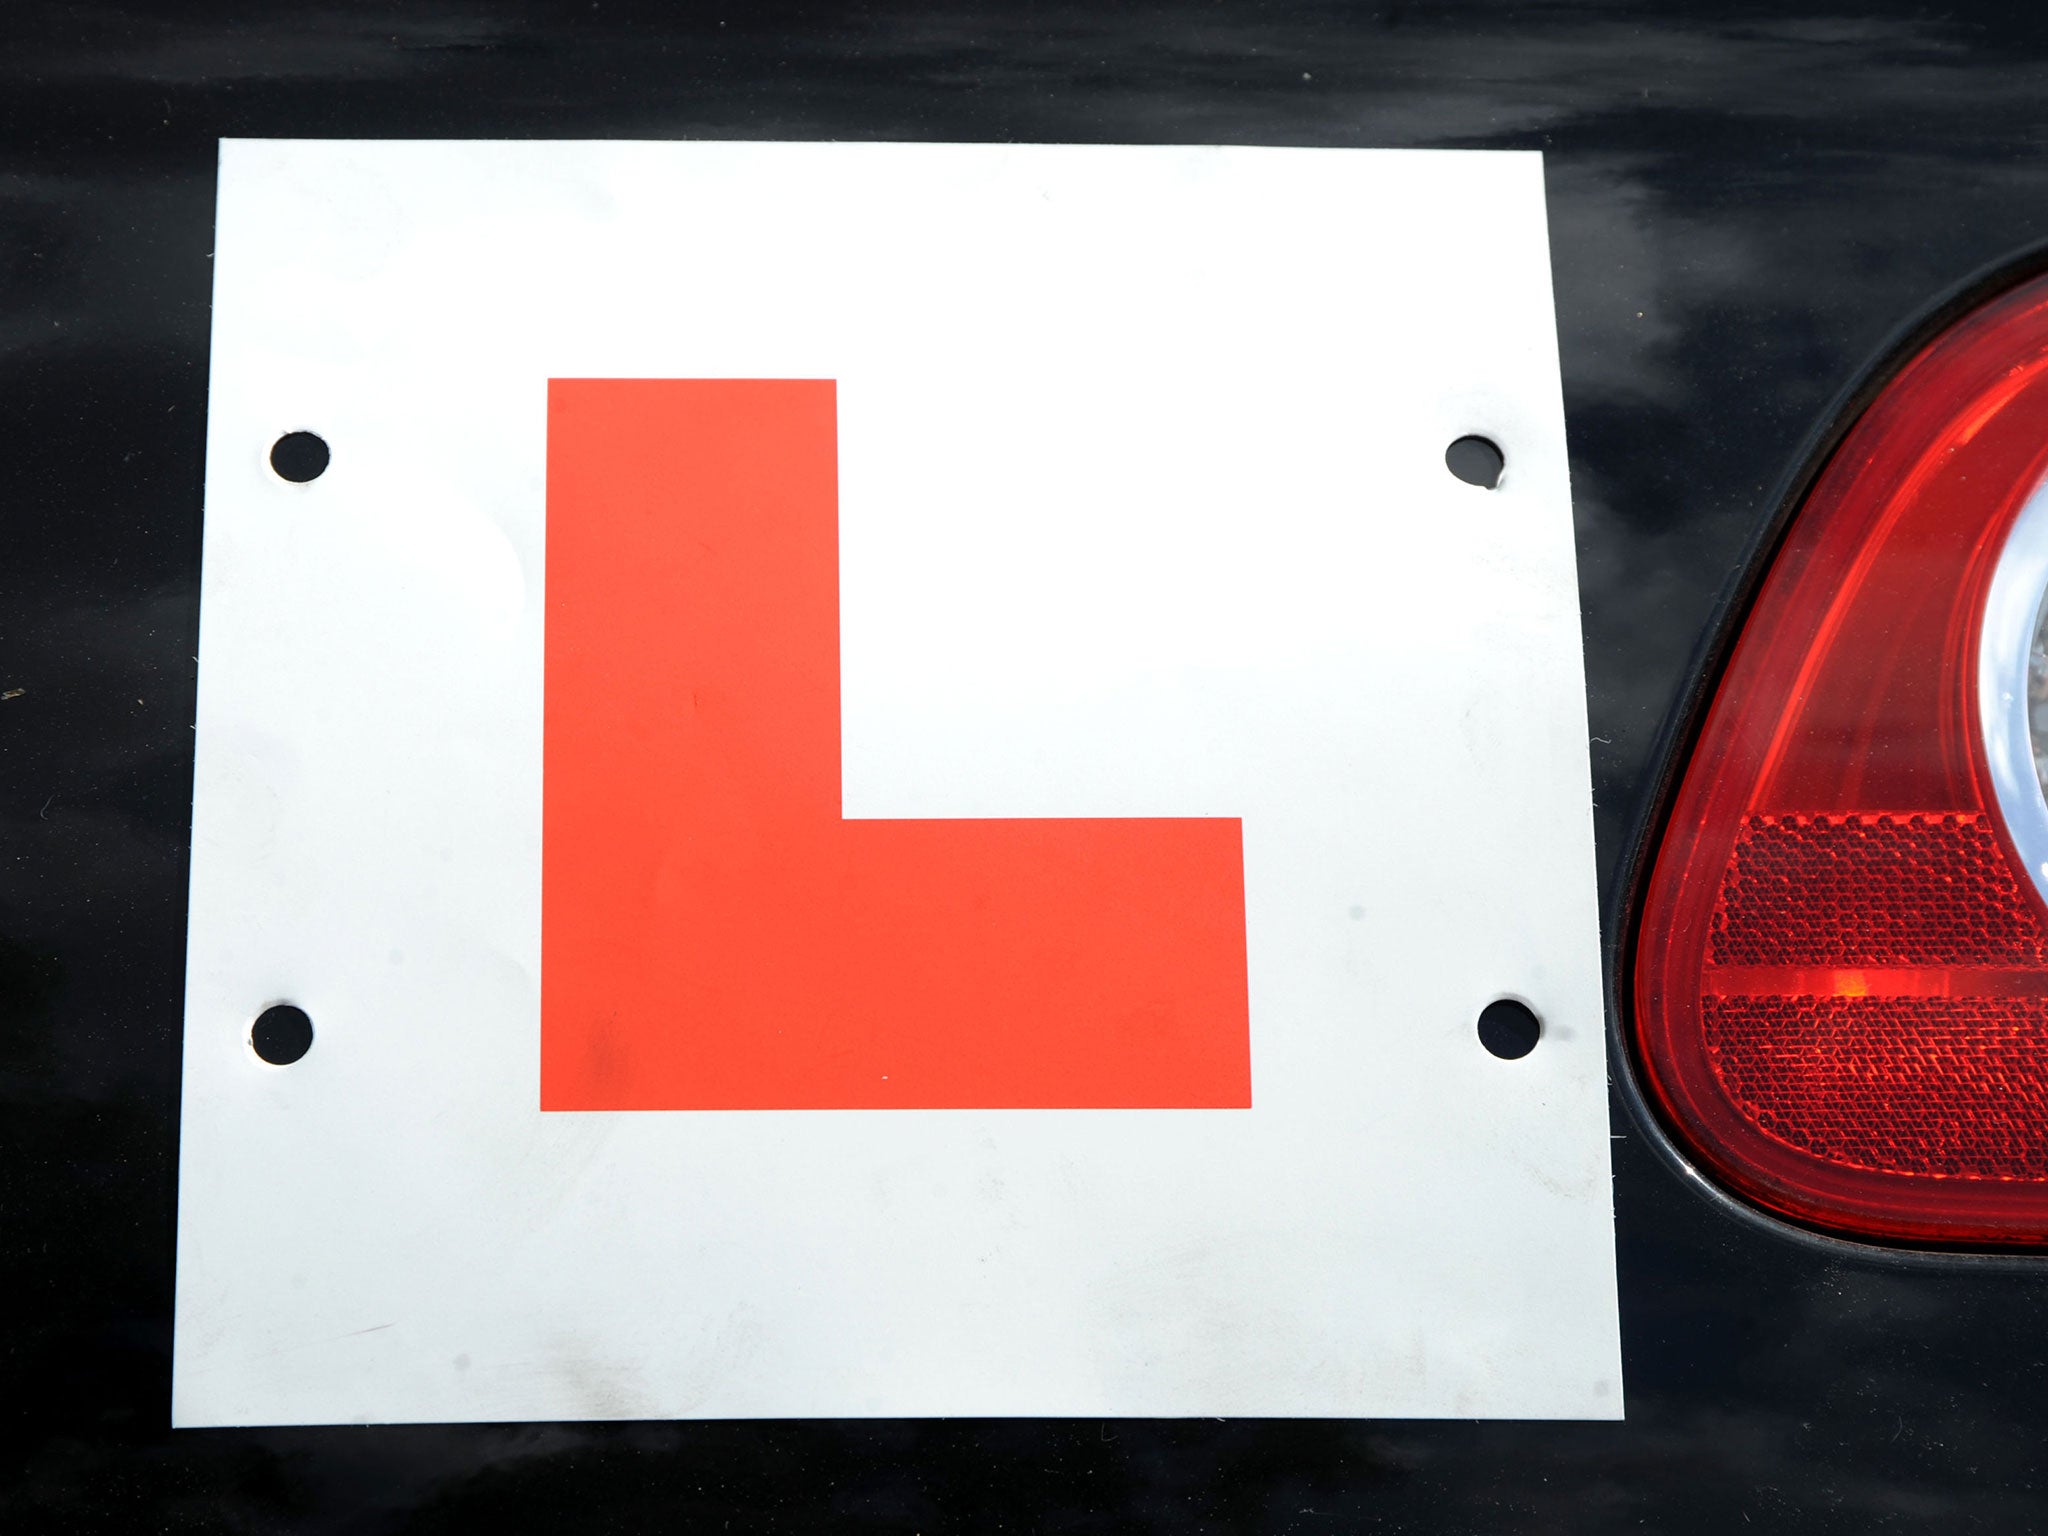 Learner drivers will be given motorway experience with an instructor before they can pass their test under new plans announced by the Government